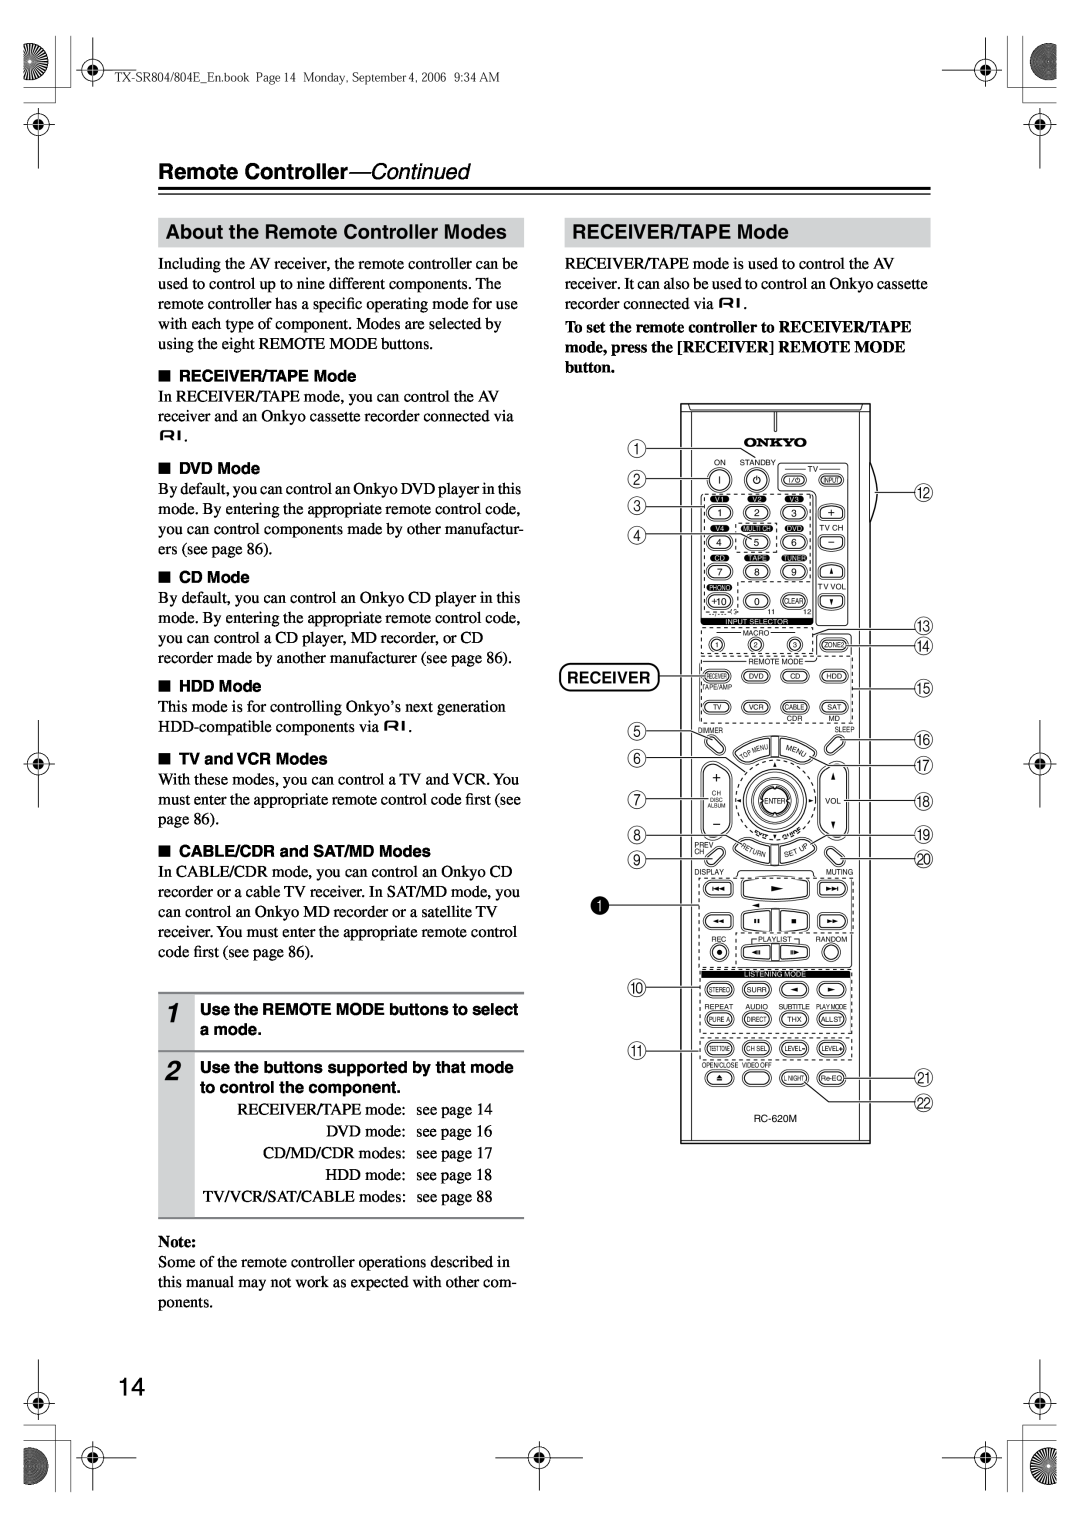 Onkyo TX-SR804E instruction manual Remote Controller—Continued, About the Remote Controller Modes, RECEIVER/TAPE Mode 